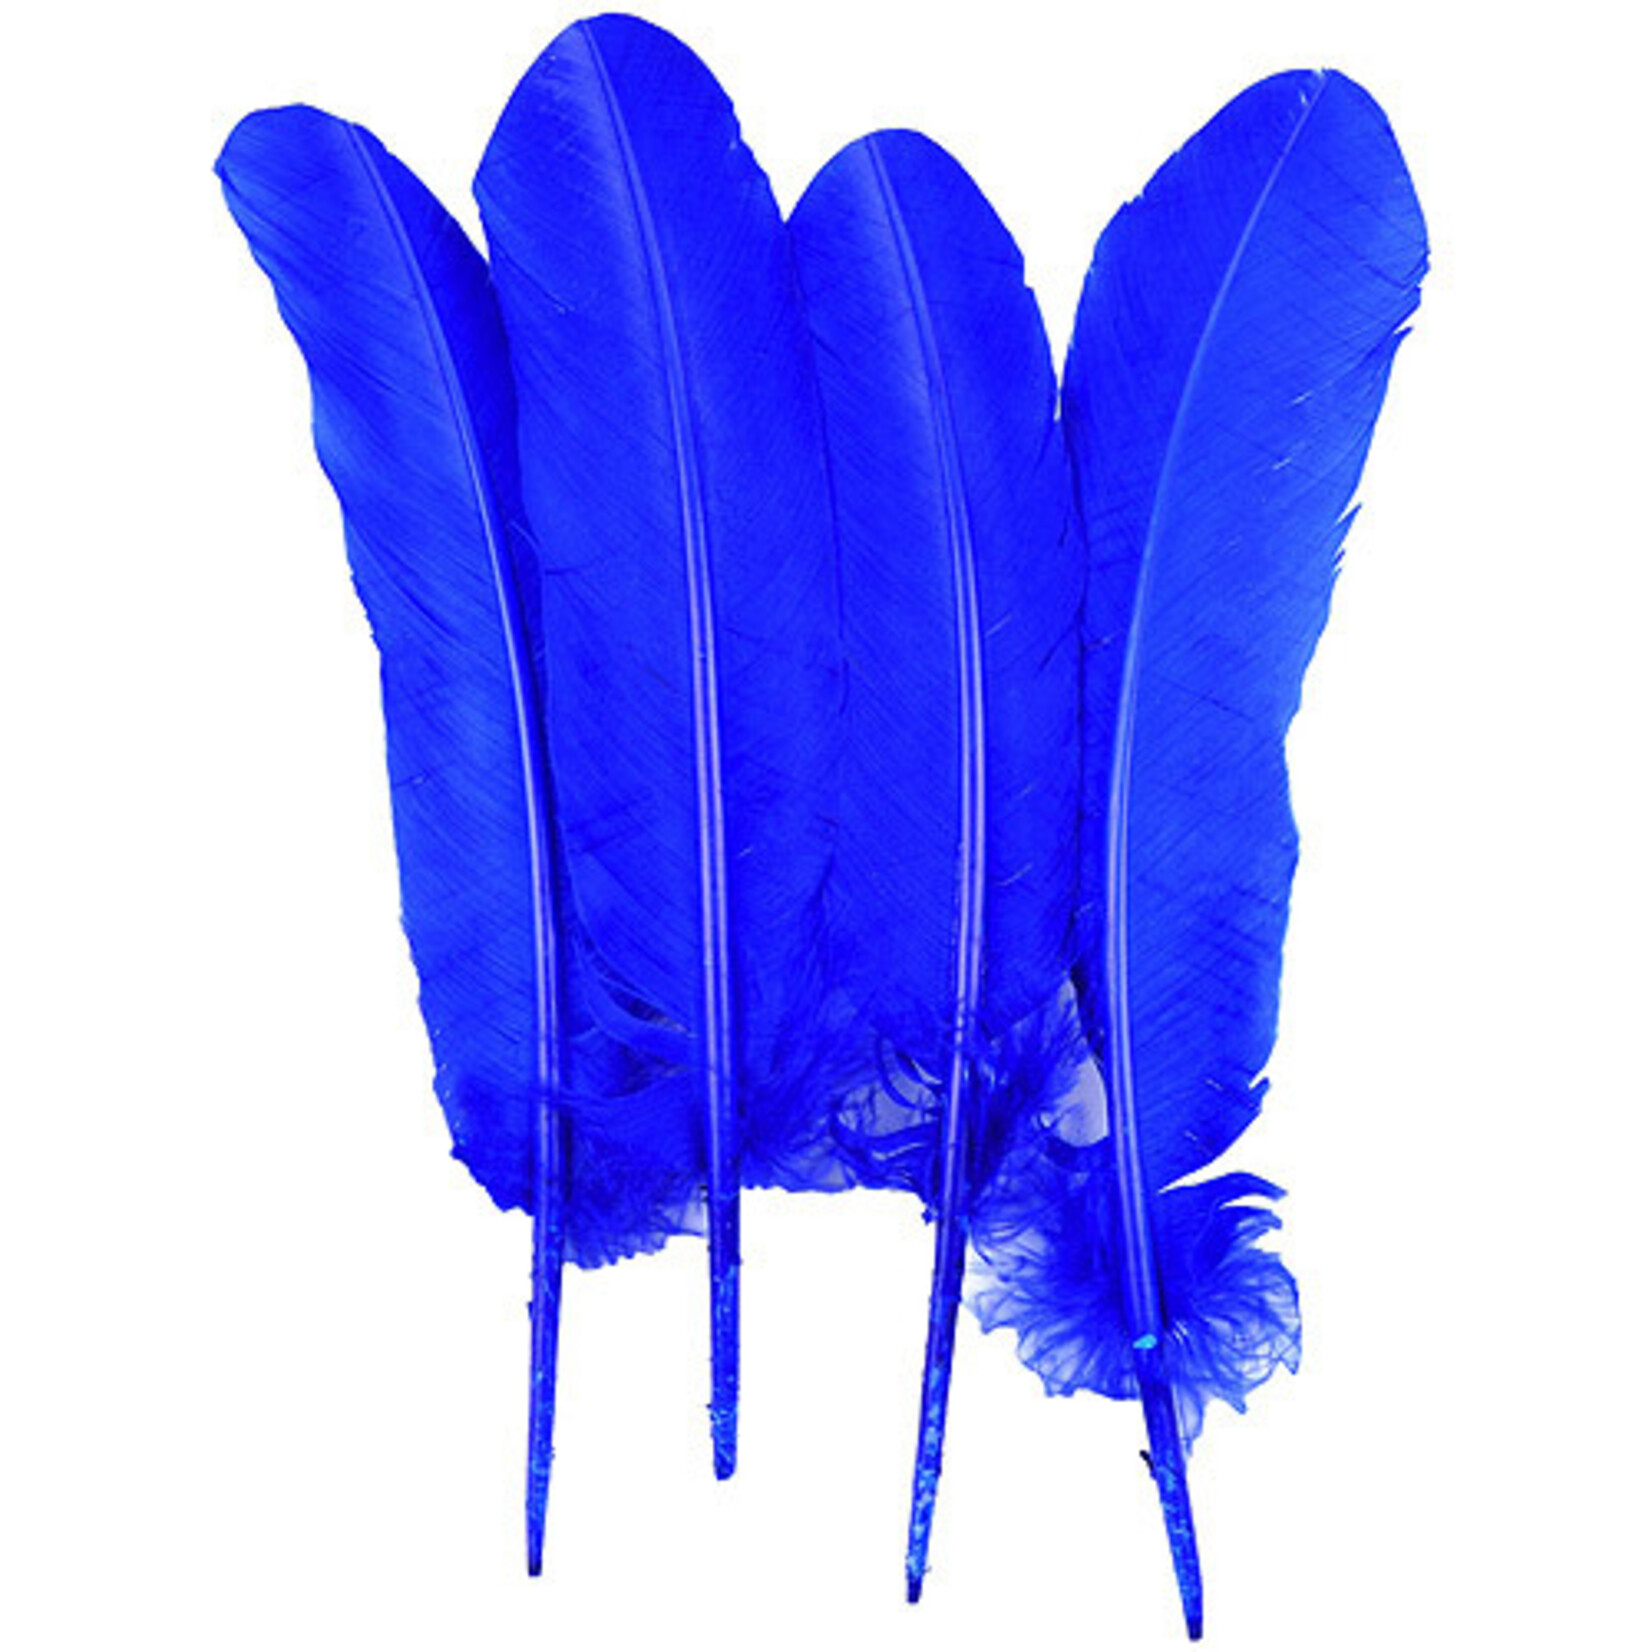 Turkey Quills 12-14 Inch 10 Pieces (5 left, 5 right) Royal Blue